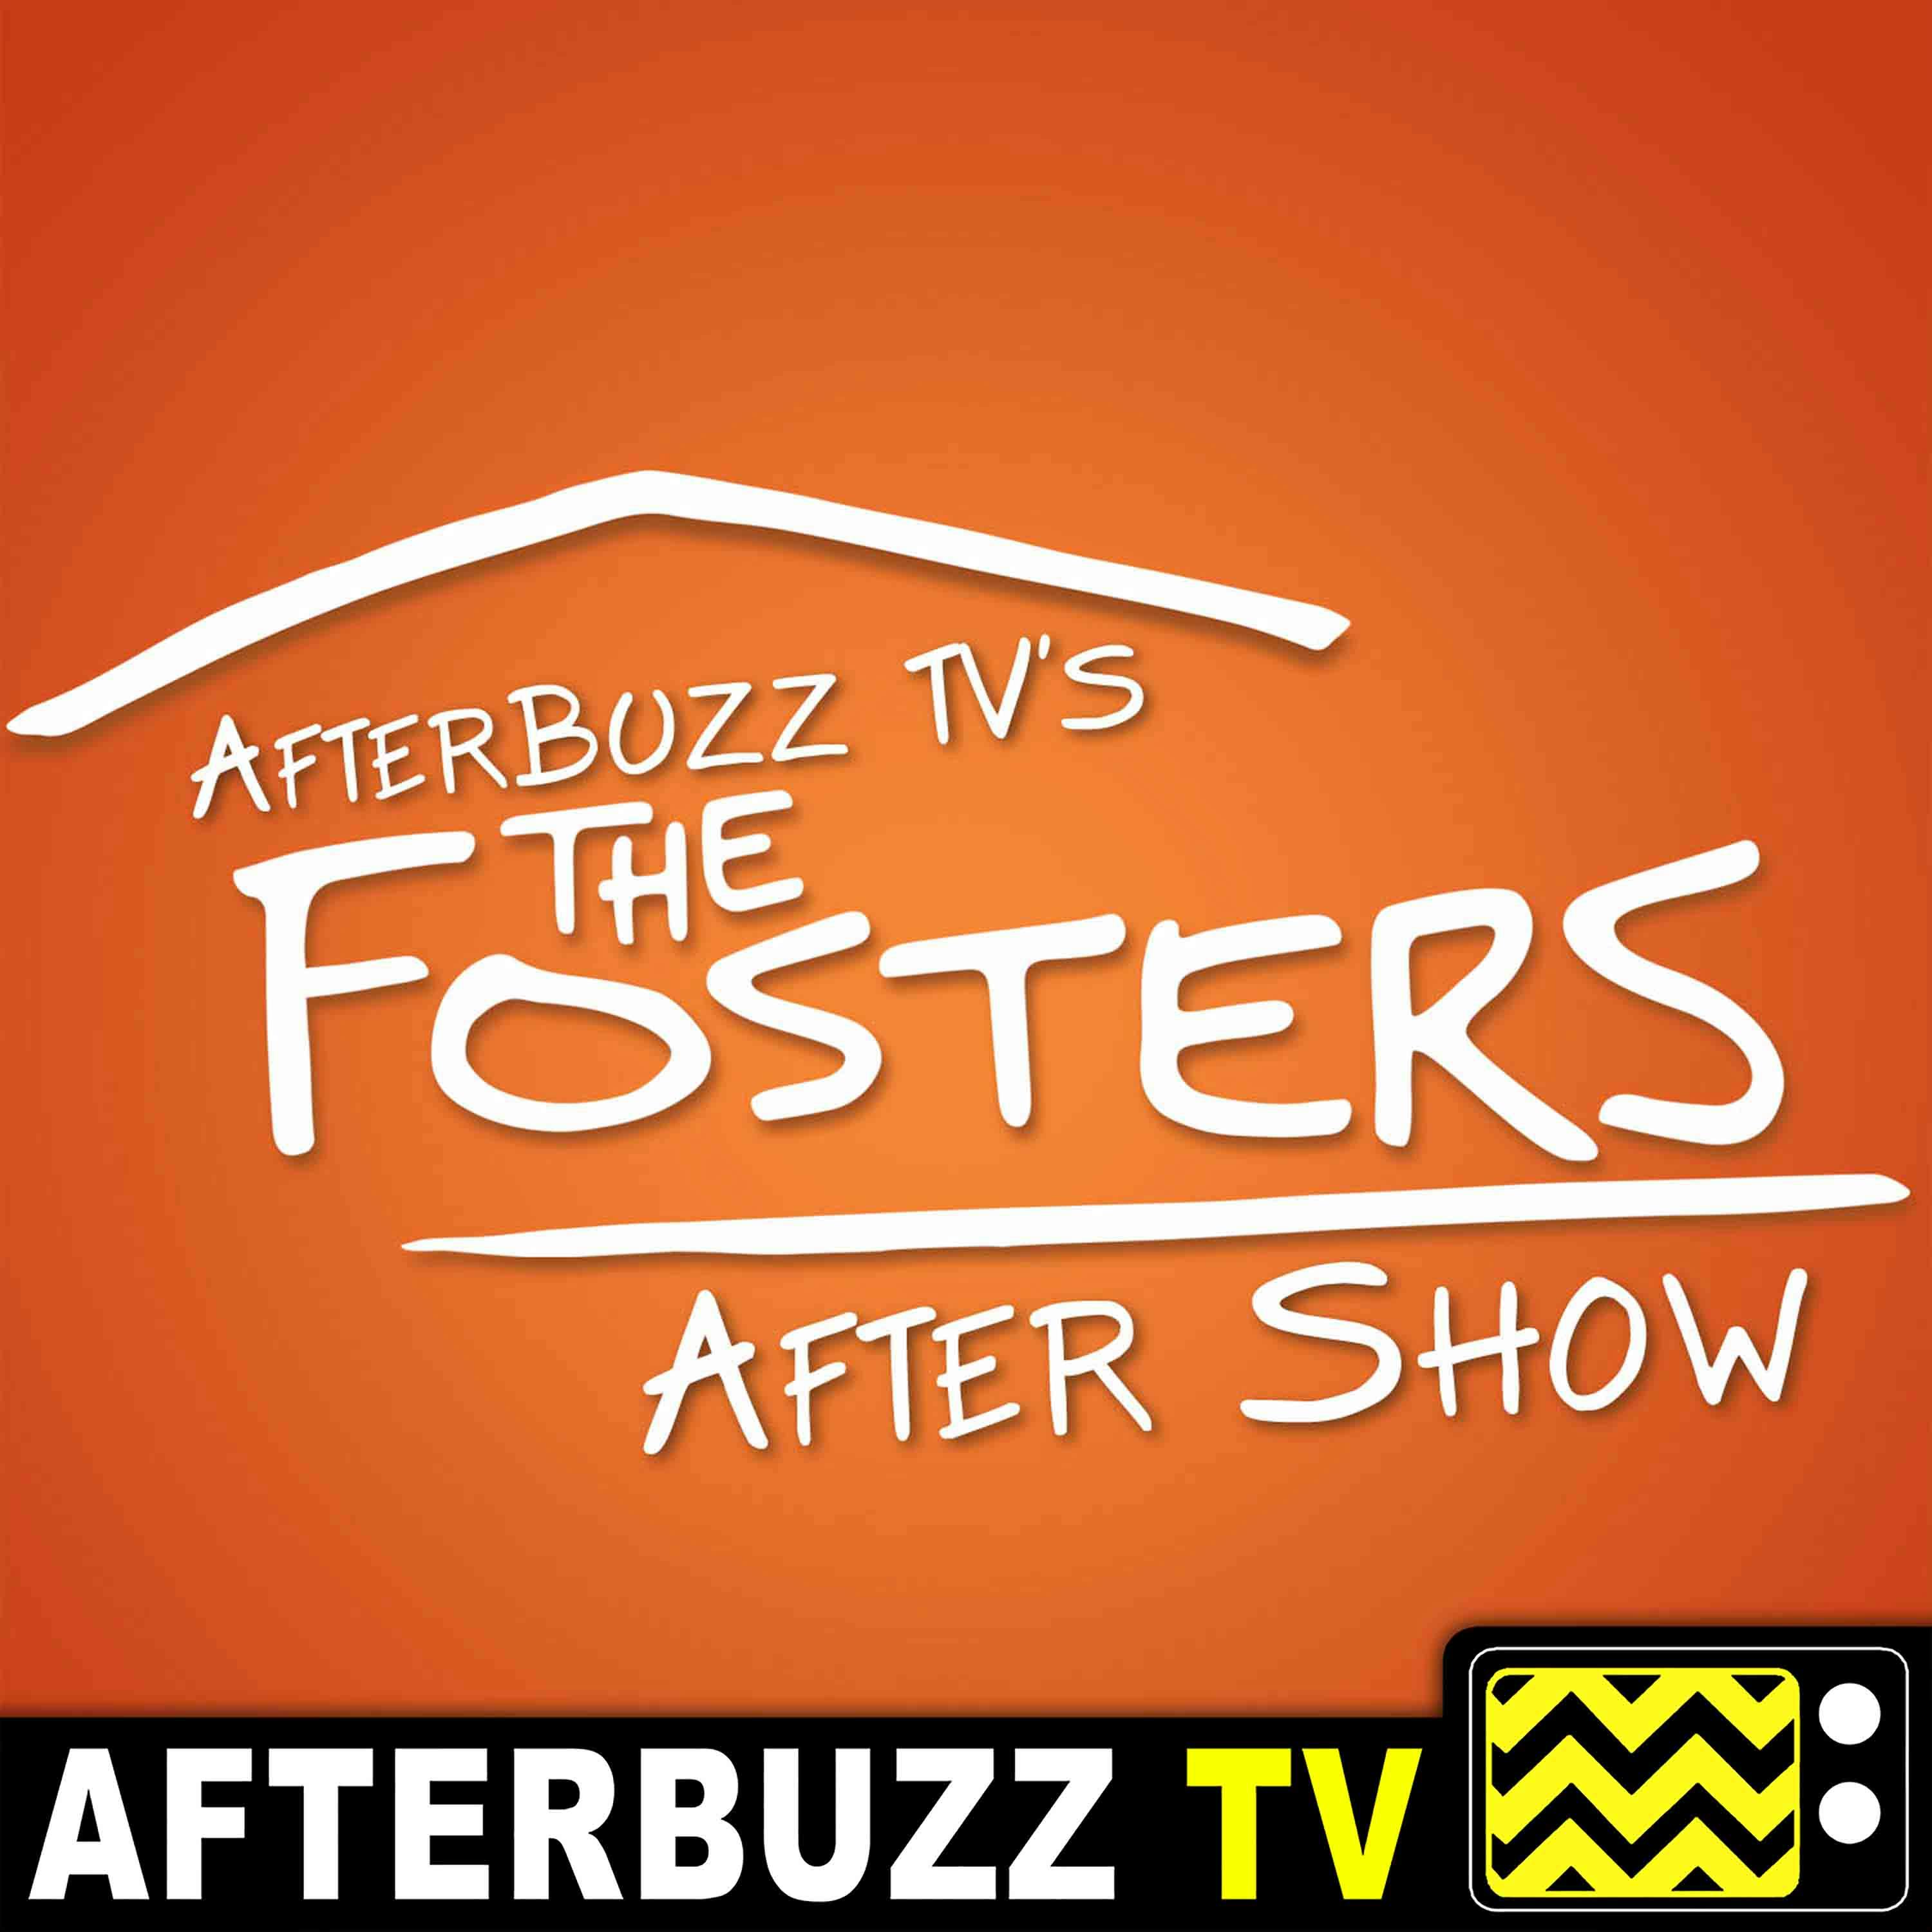 The Fosters S:4 | Cierra Ramirez Guests On Trust E:3 | AfterBuzz TV AfterShow